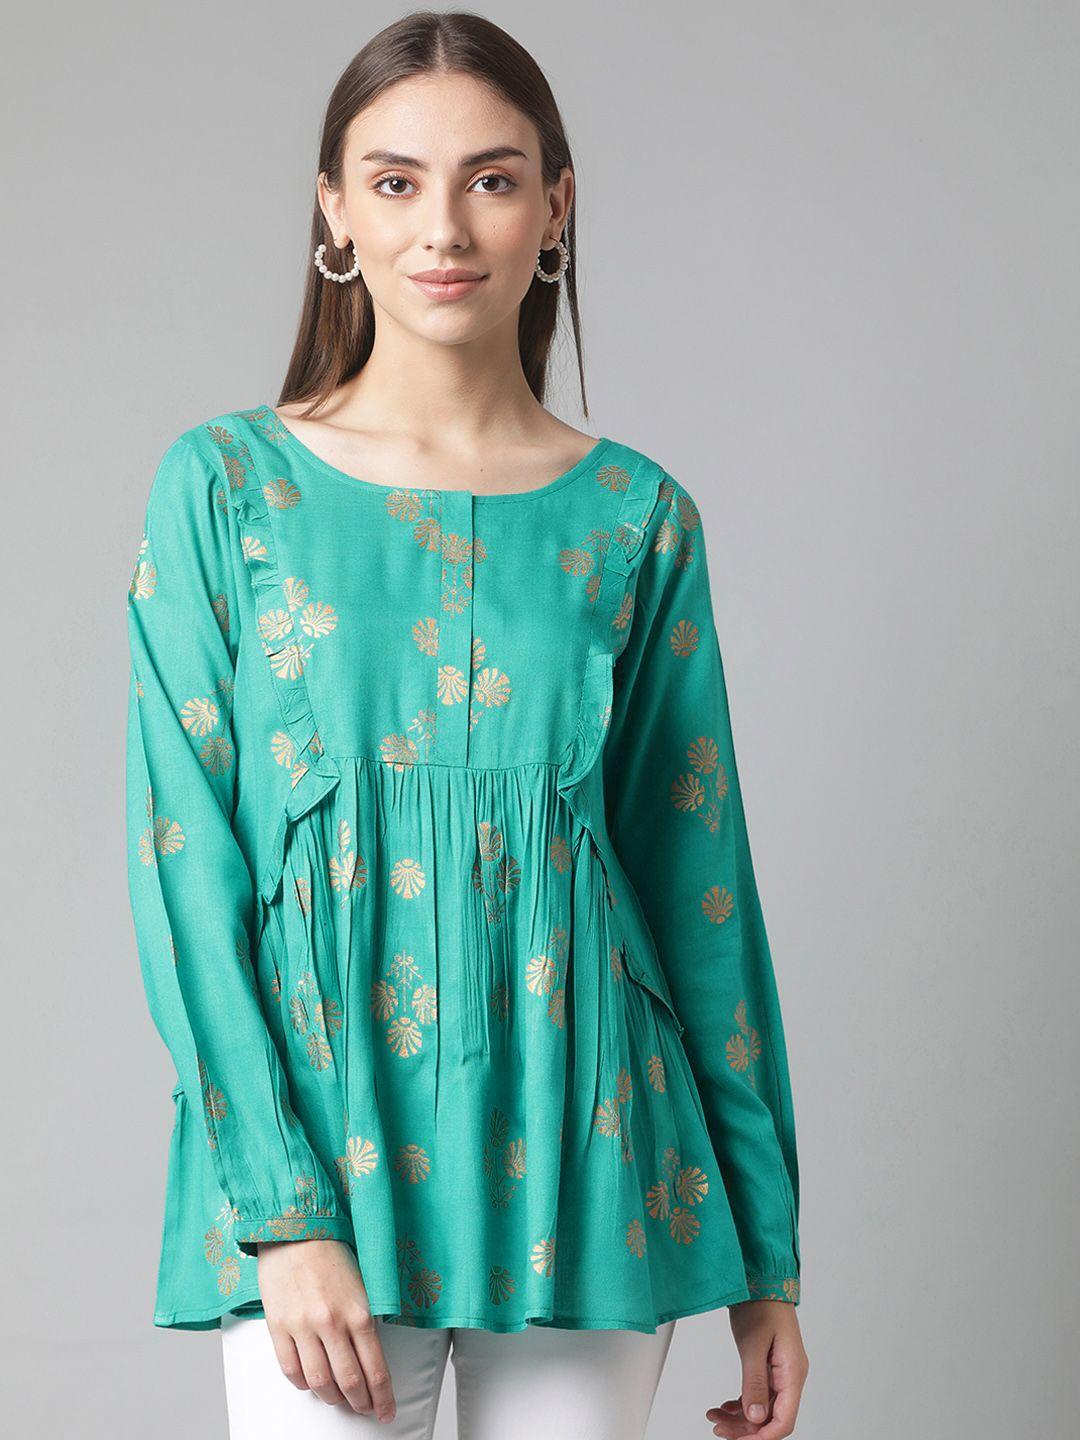 mbe green floral print top